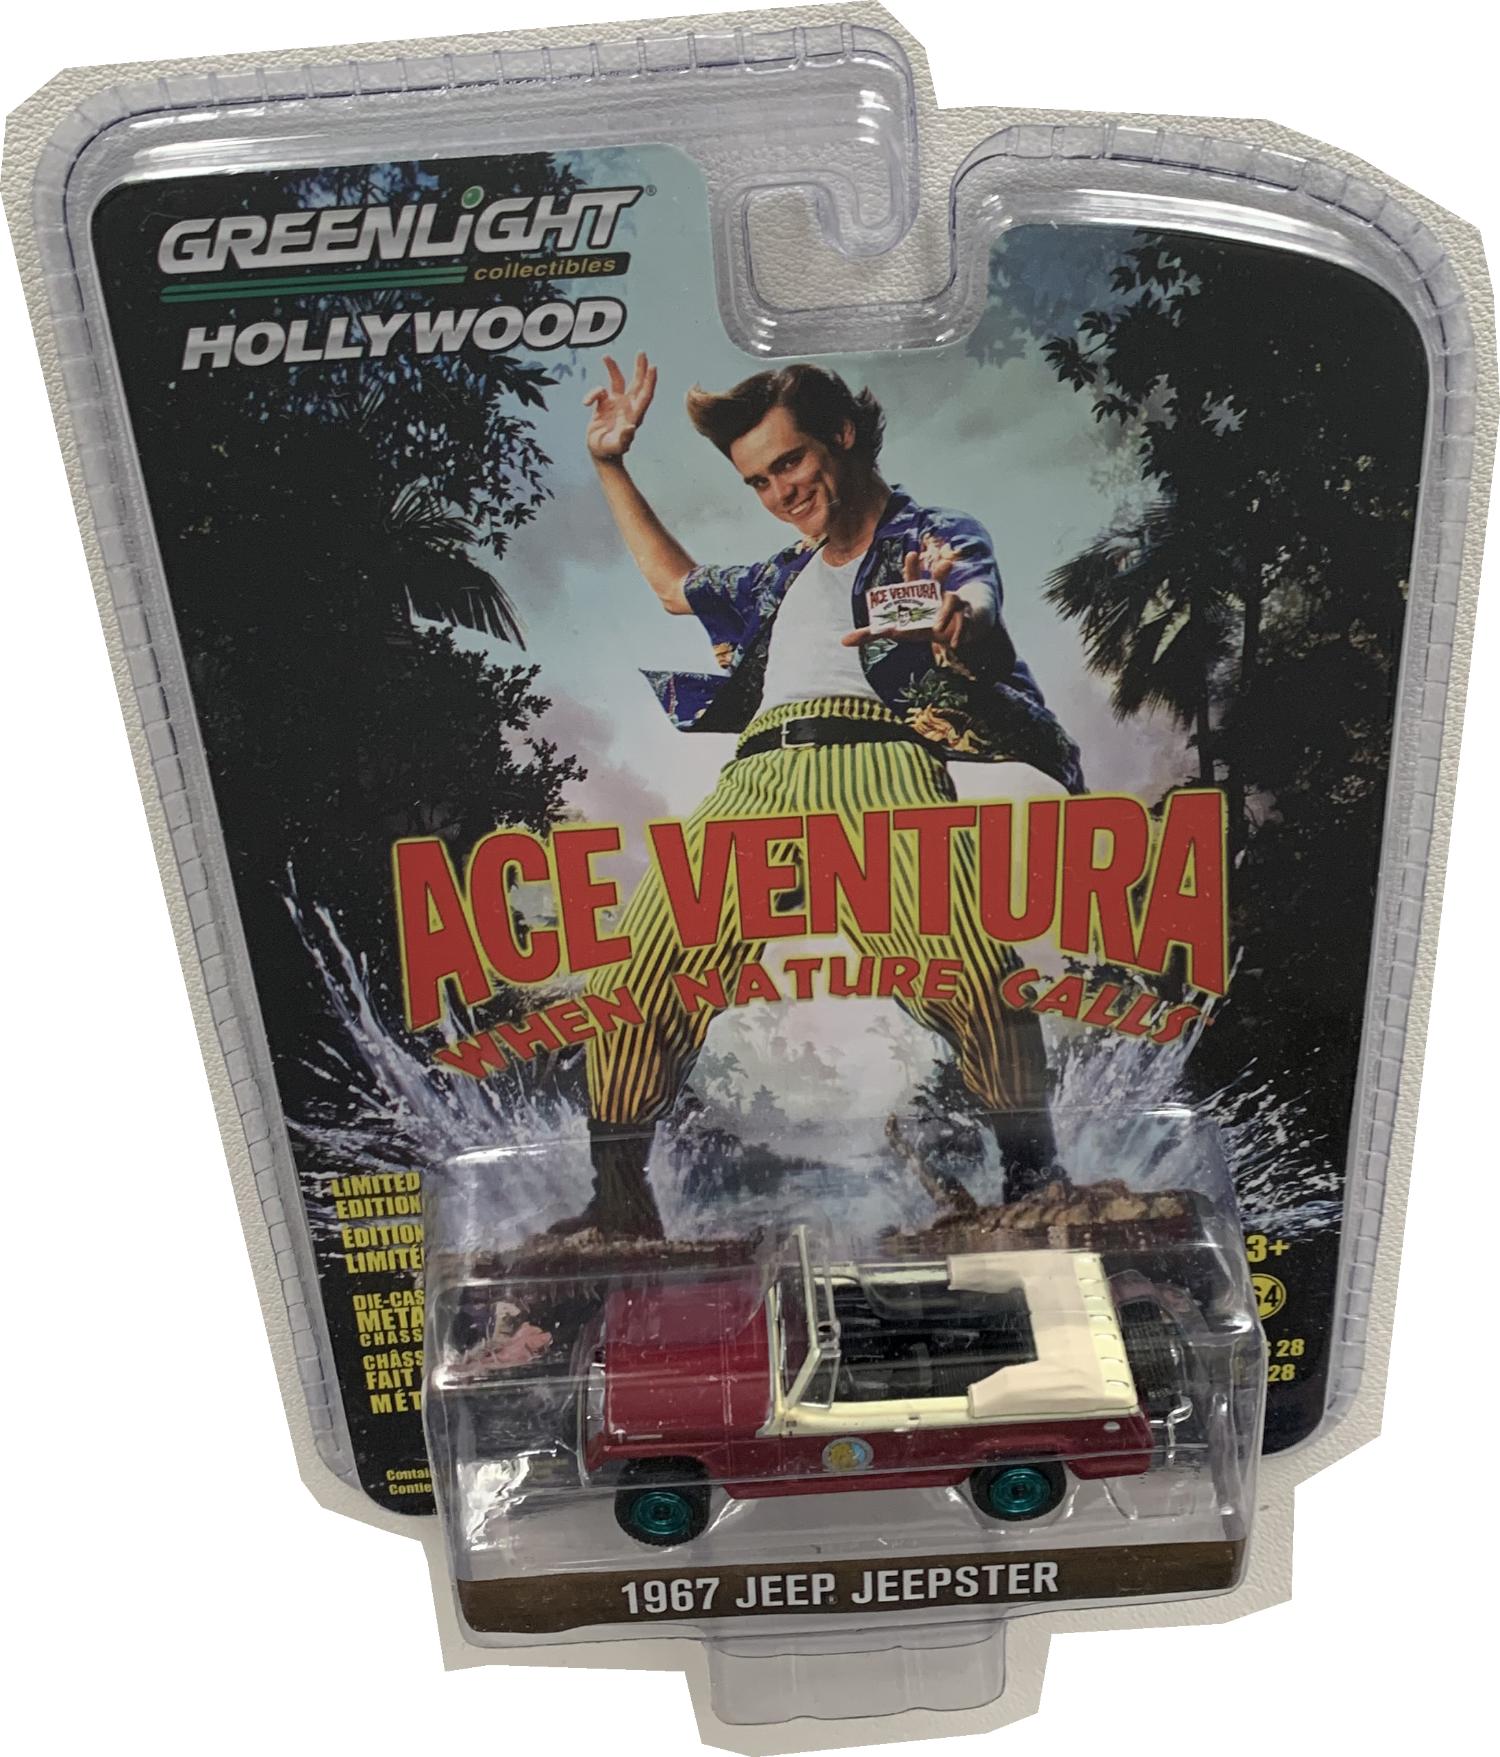 Scale diecast models from the Ace Ventura films